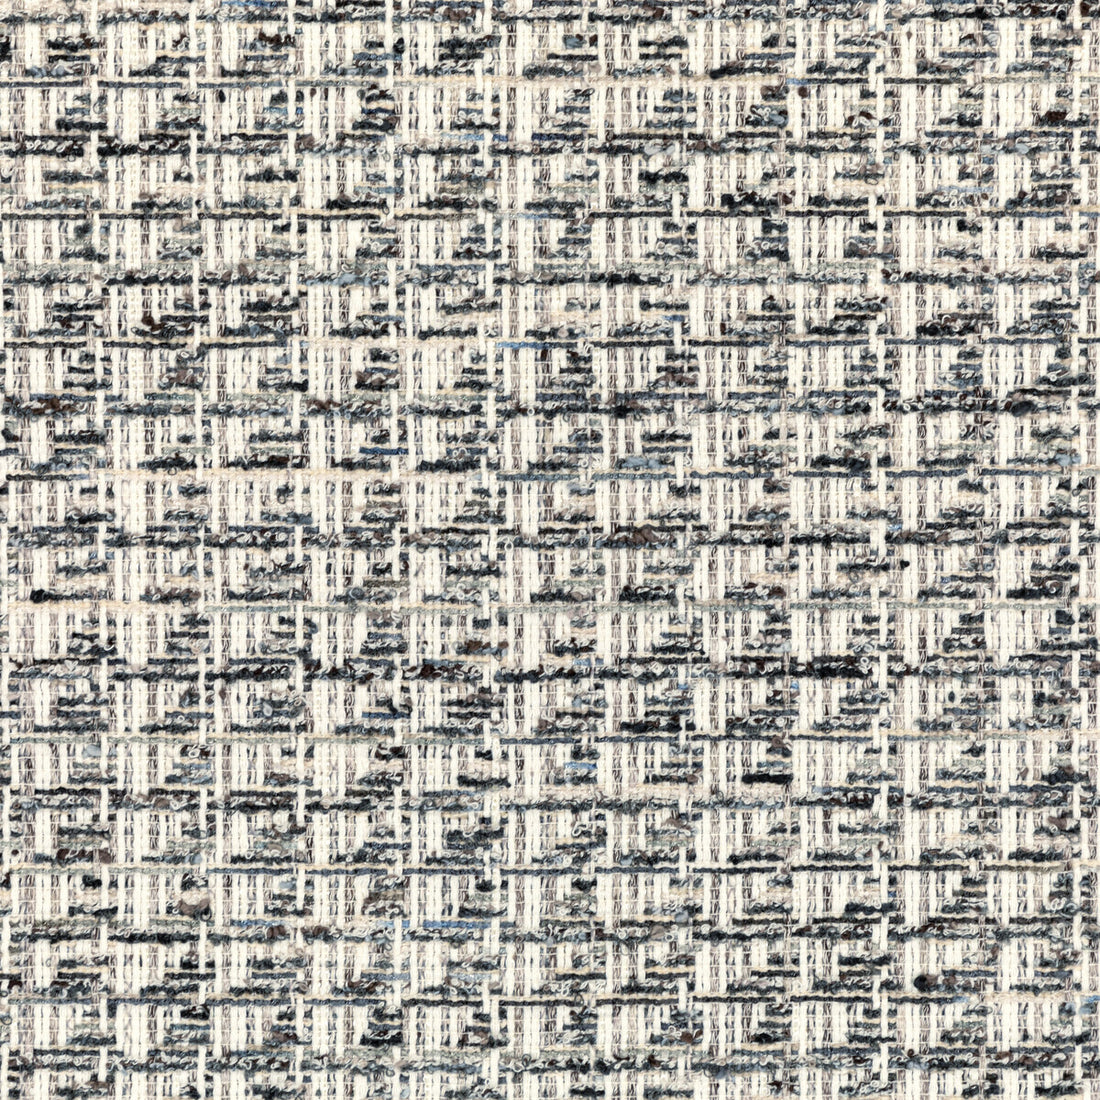 Kravet Couture fabric in 36619-121 color - pattern 36619.121.0 - by Kravet Couture in the Mabley Handler collection